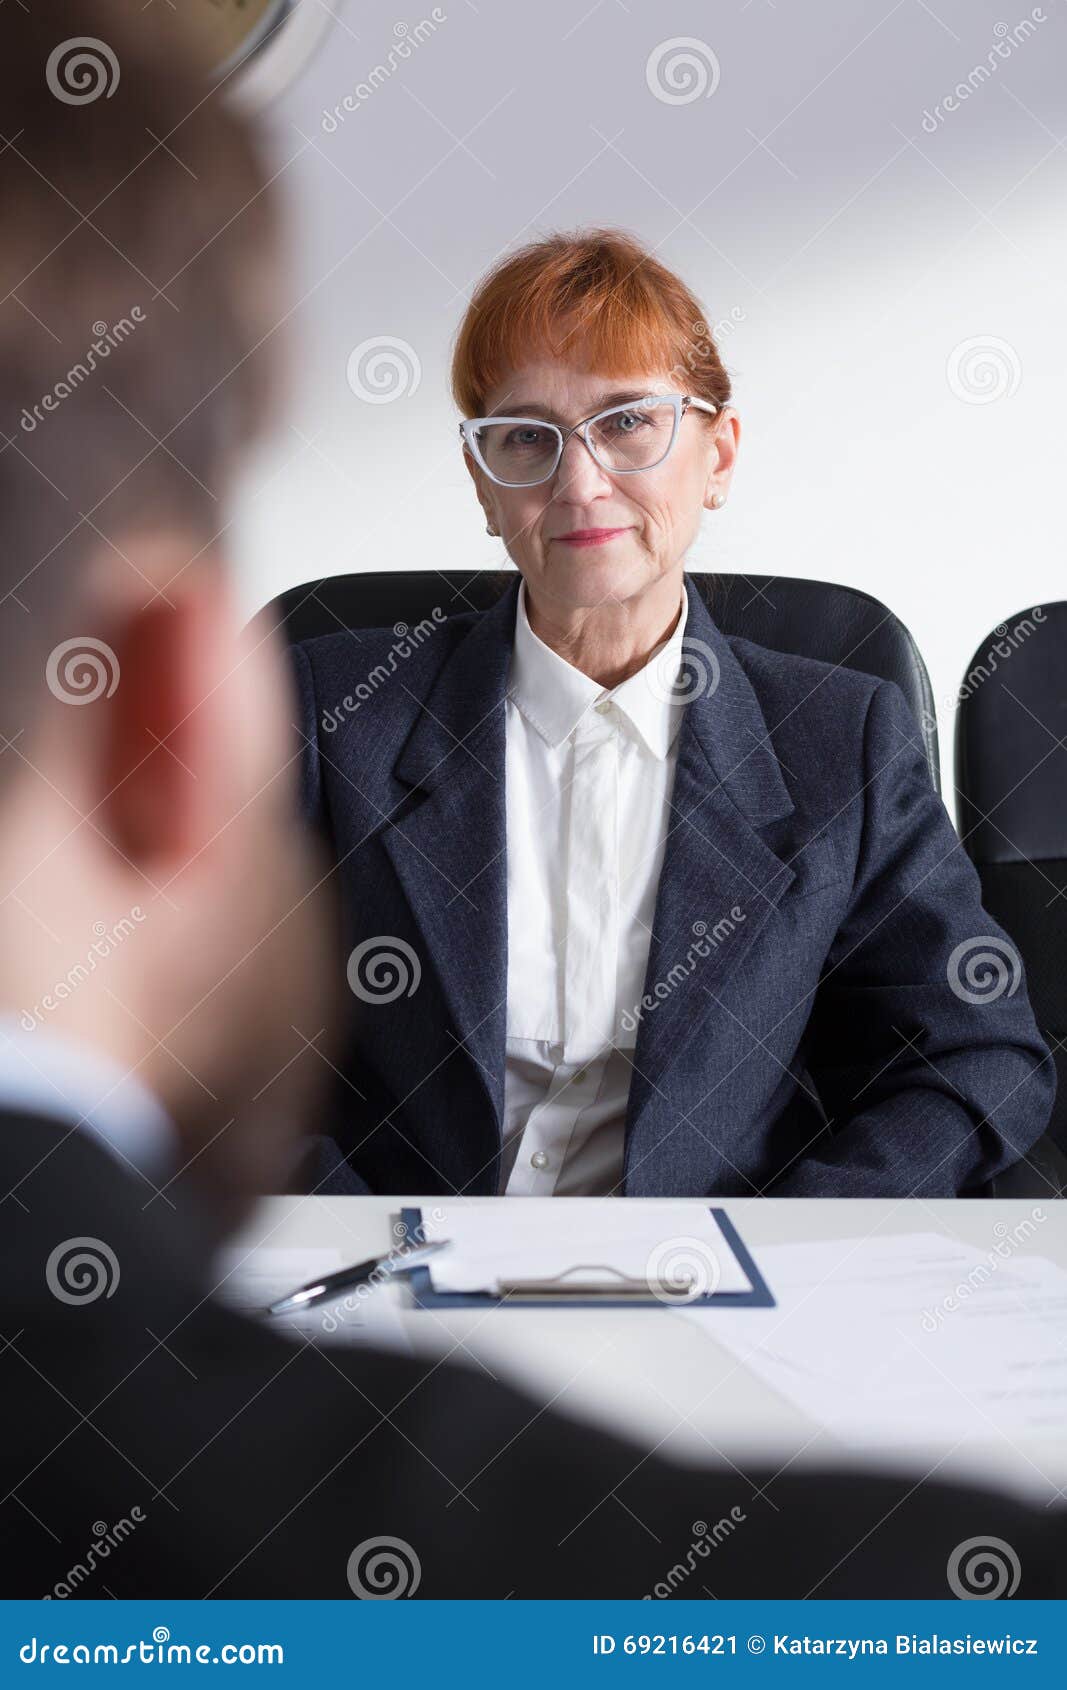 Older Boss during Interview with Applicant Stock Image - Image of apply: 69216421